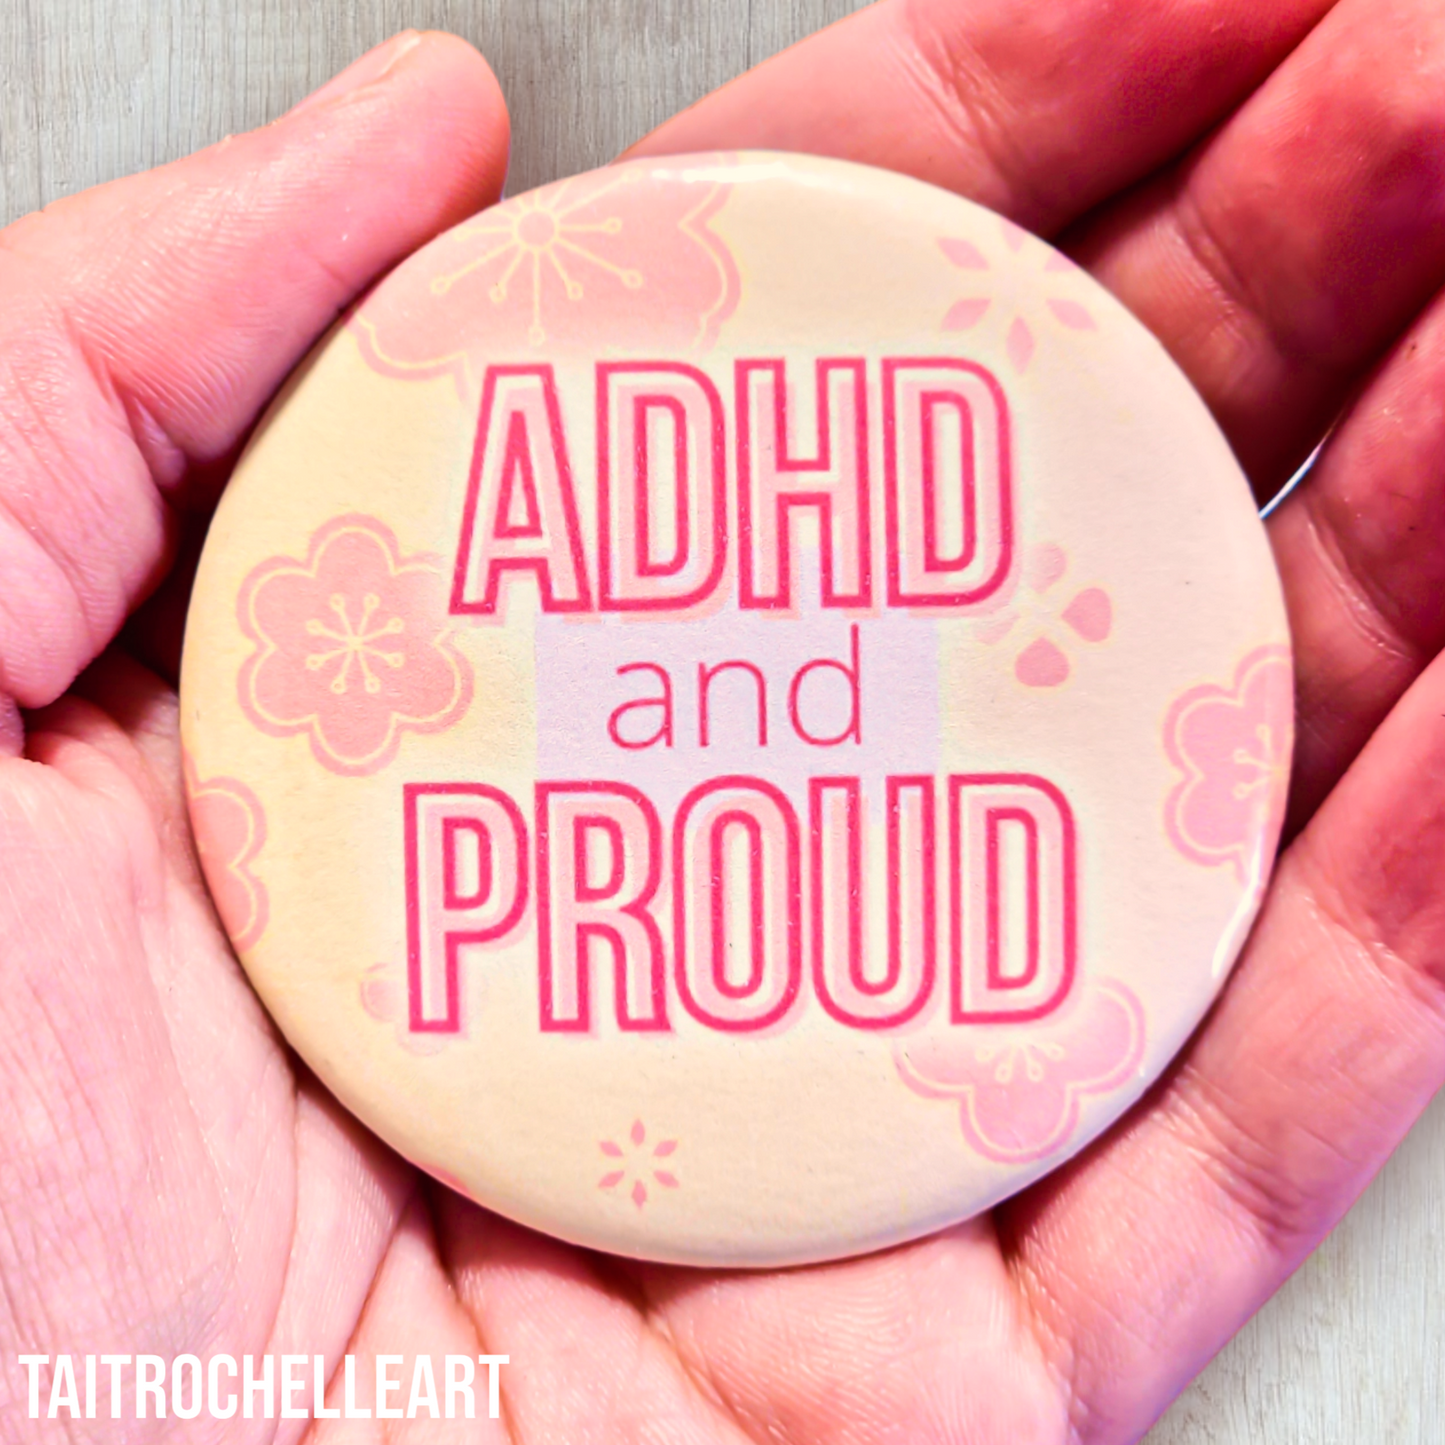 ADHD and Proud Badge